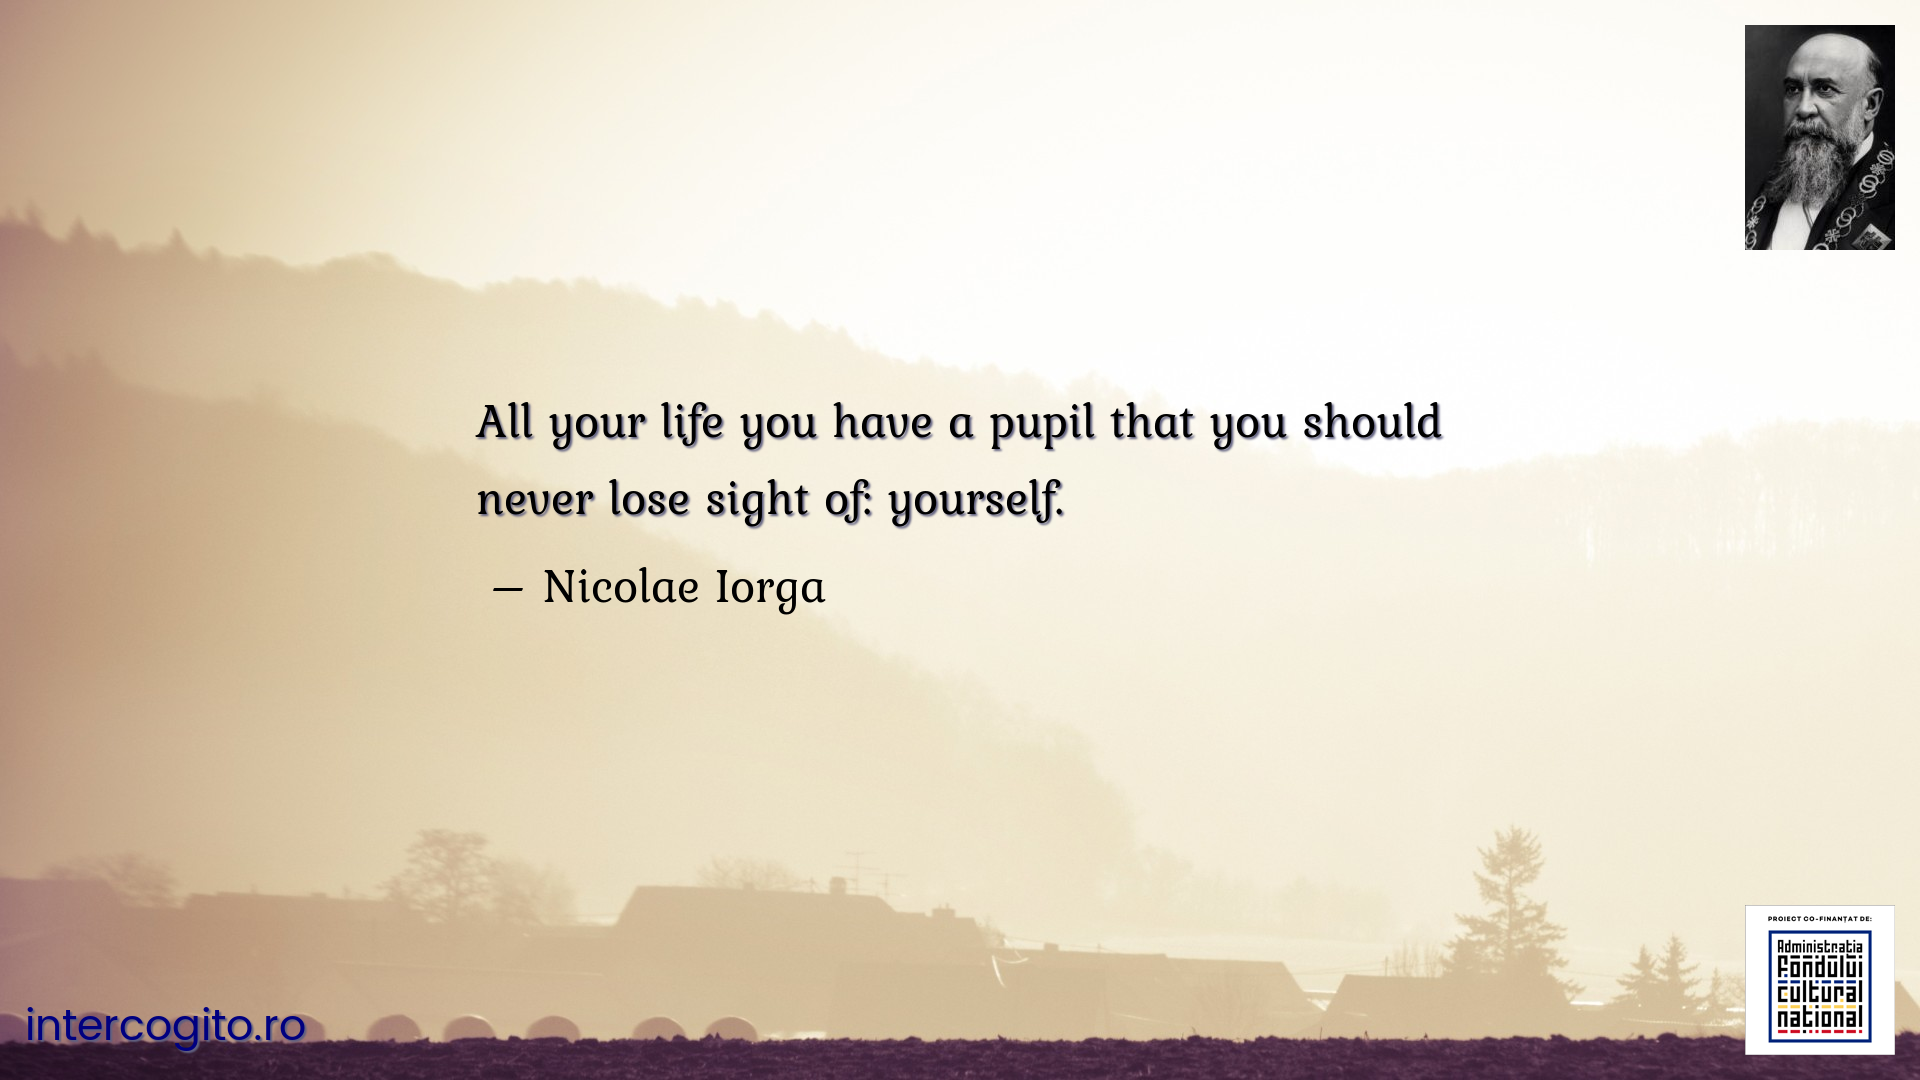 All your life you have a pupil that you should never lose sight of: yourself.